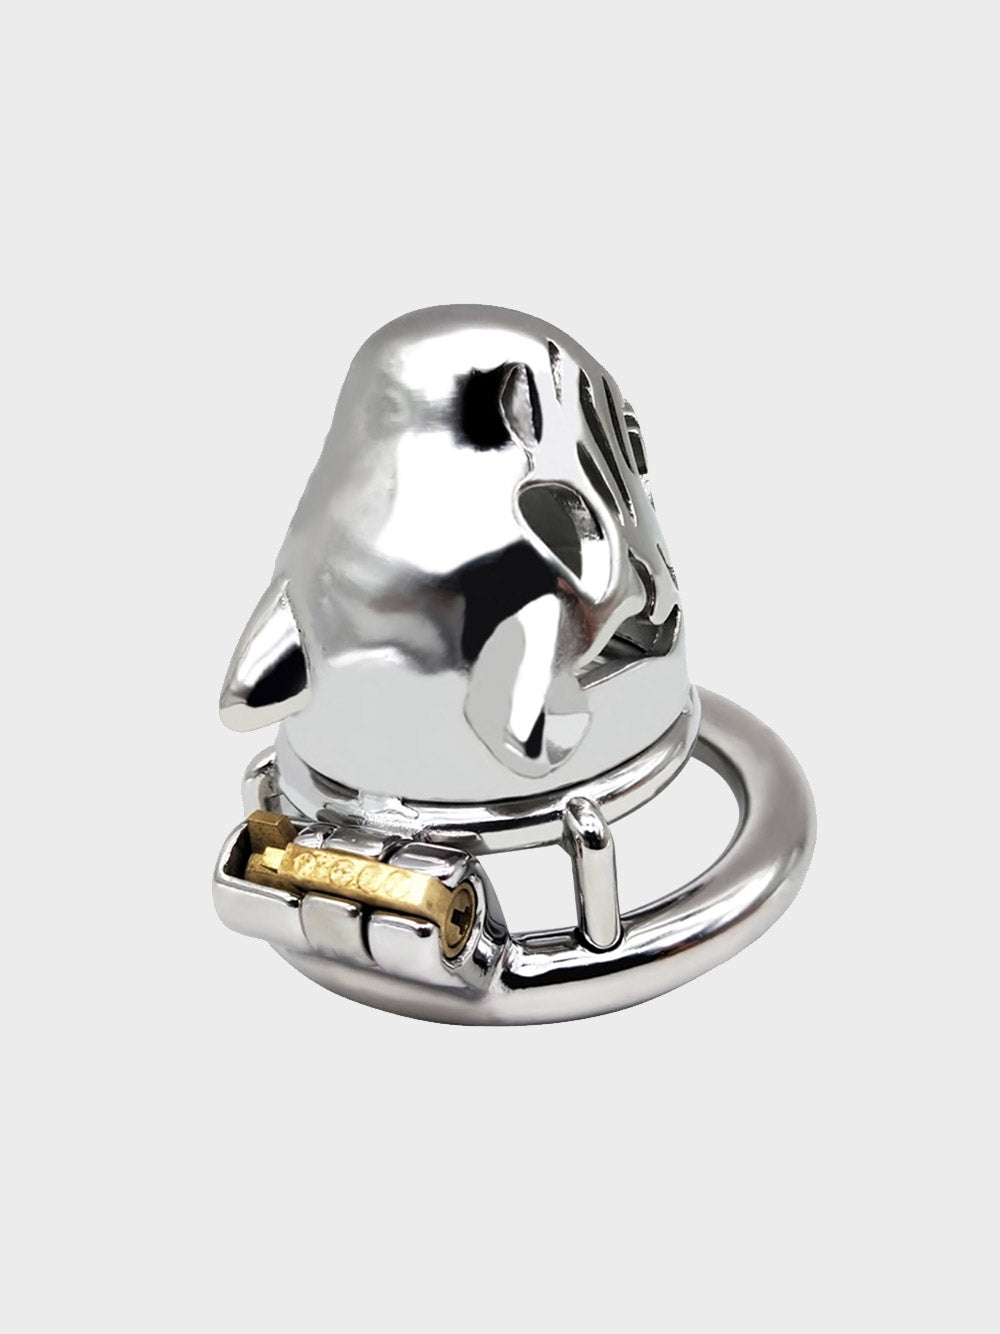 metal chastity cage for men in the shape of a tiger